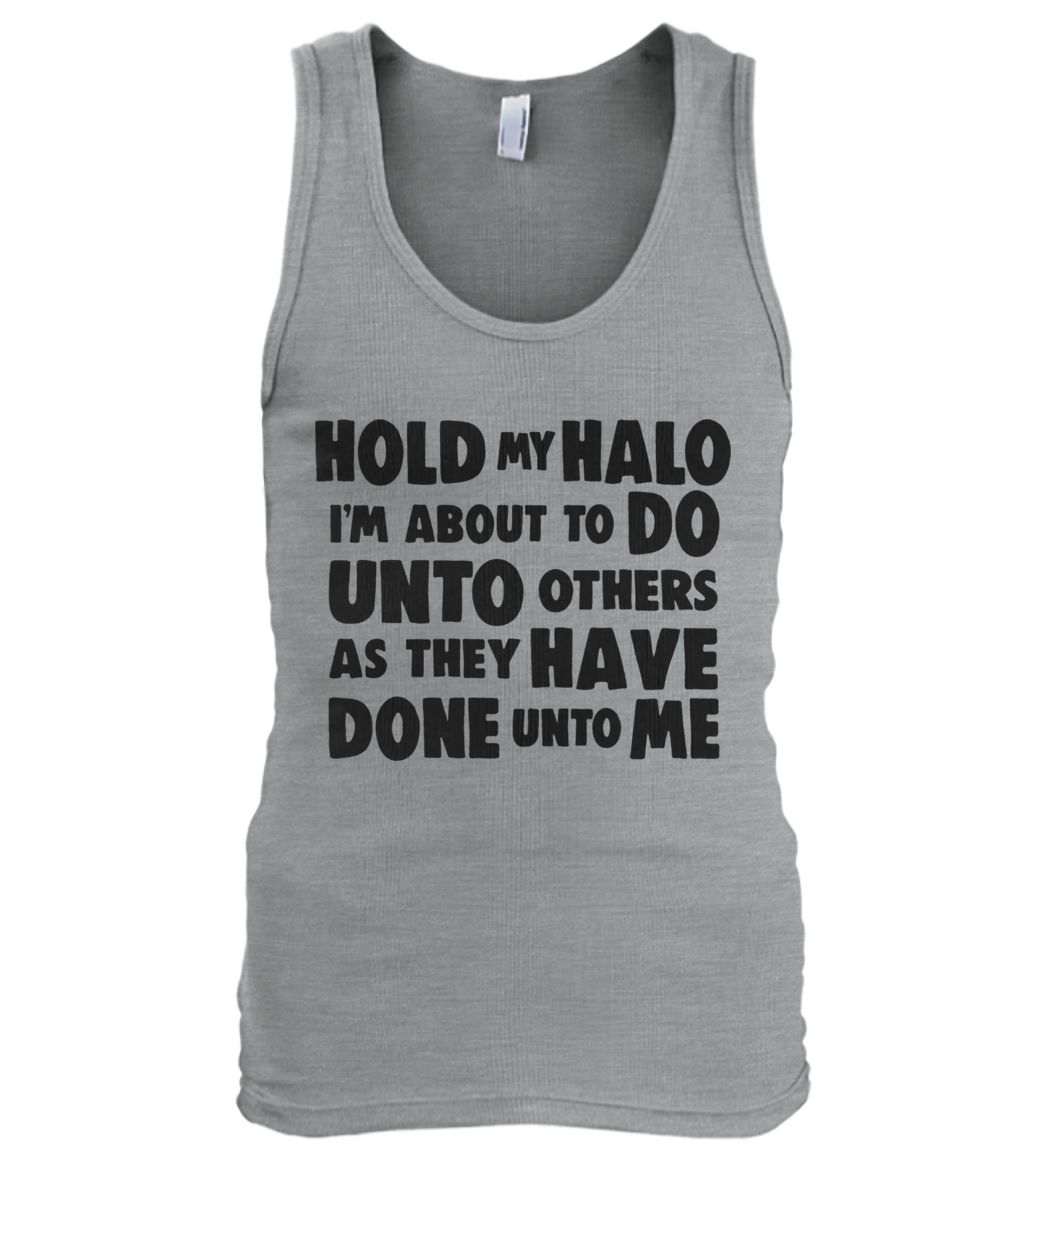 Hold my halo I'm about to do unto others as they have done unto me tank top